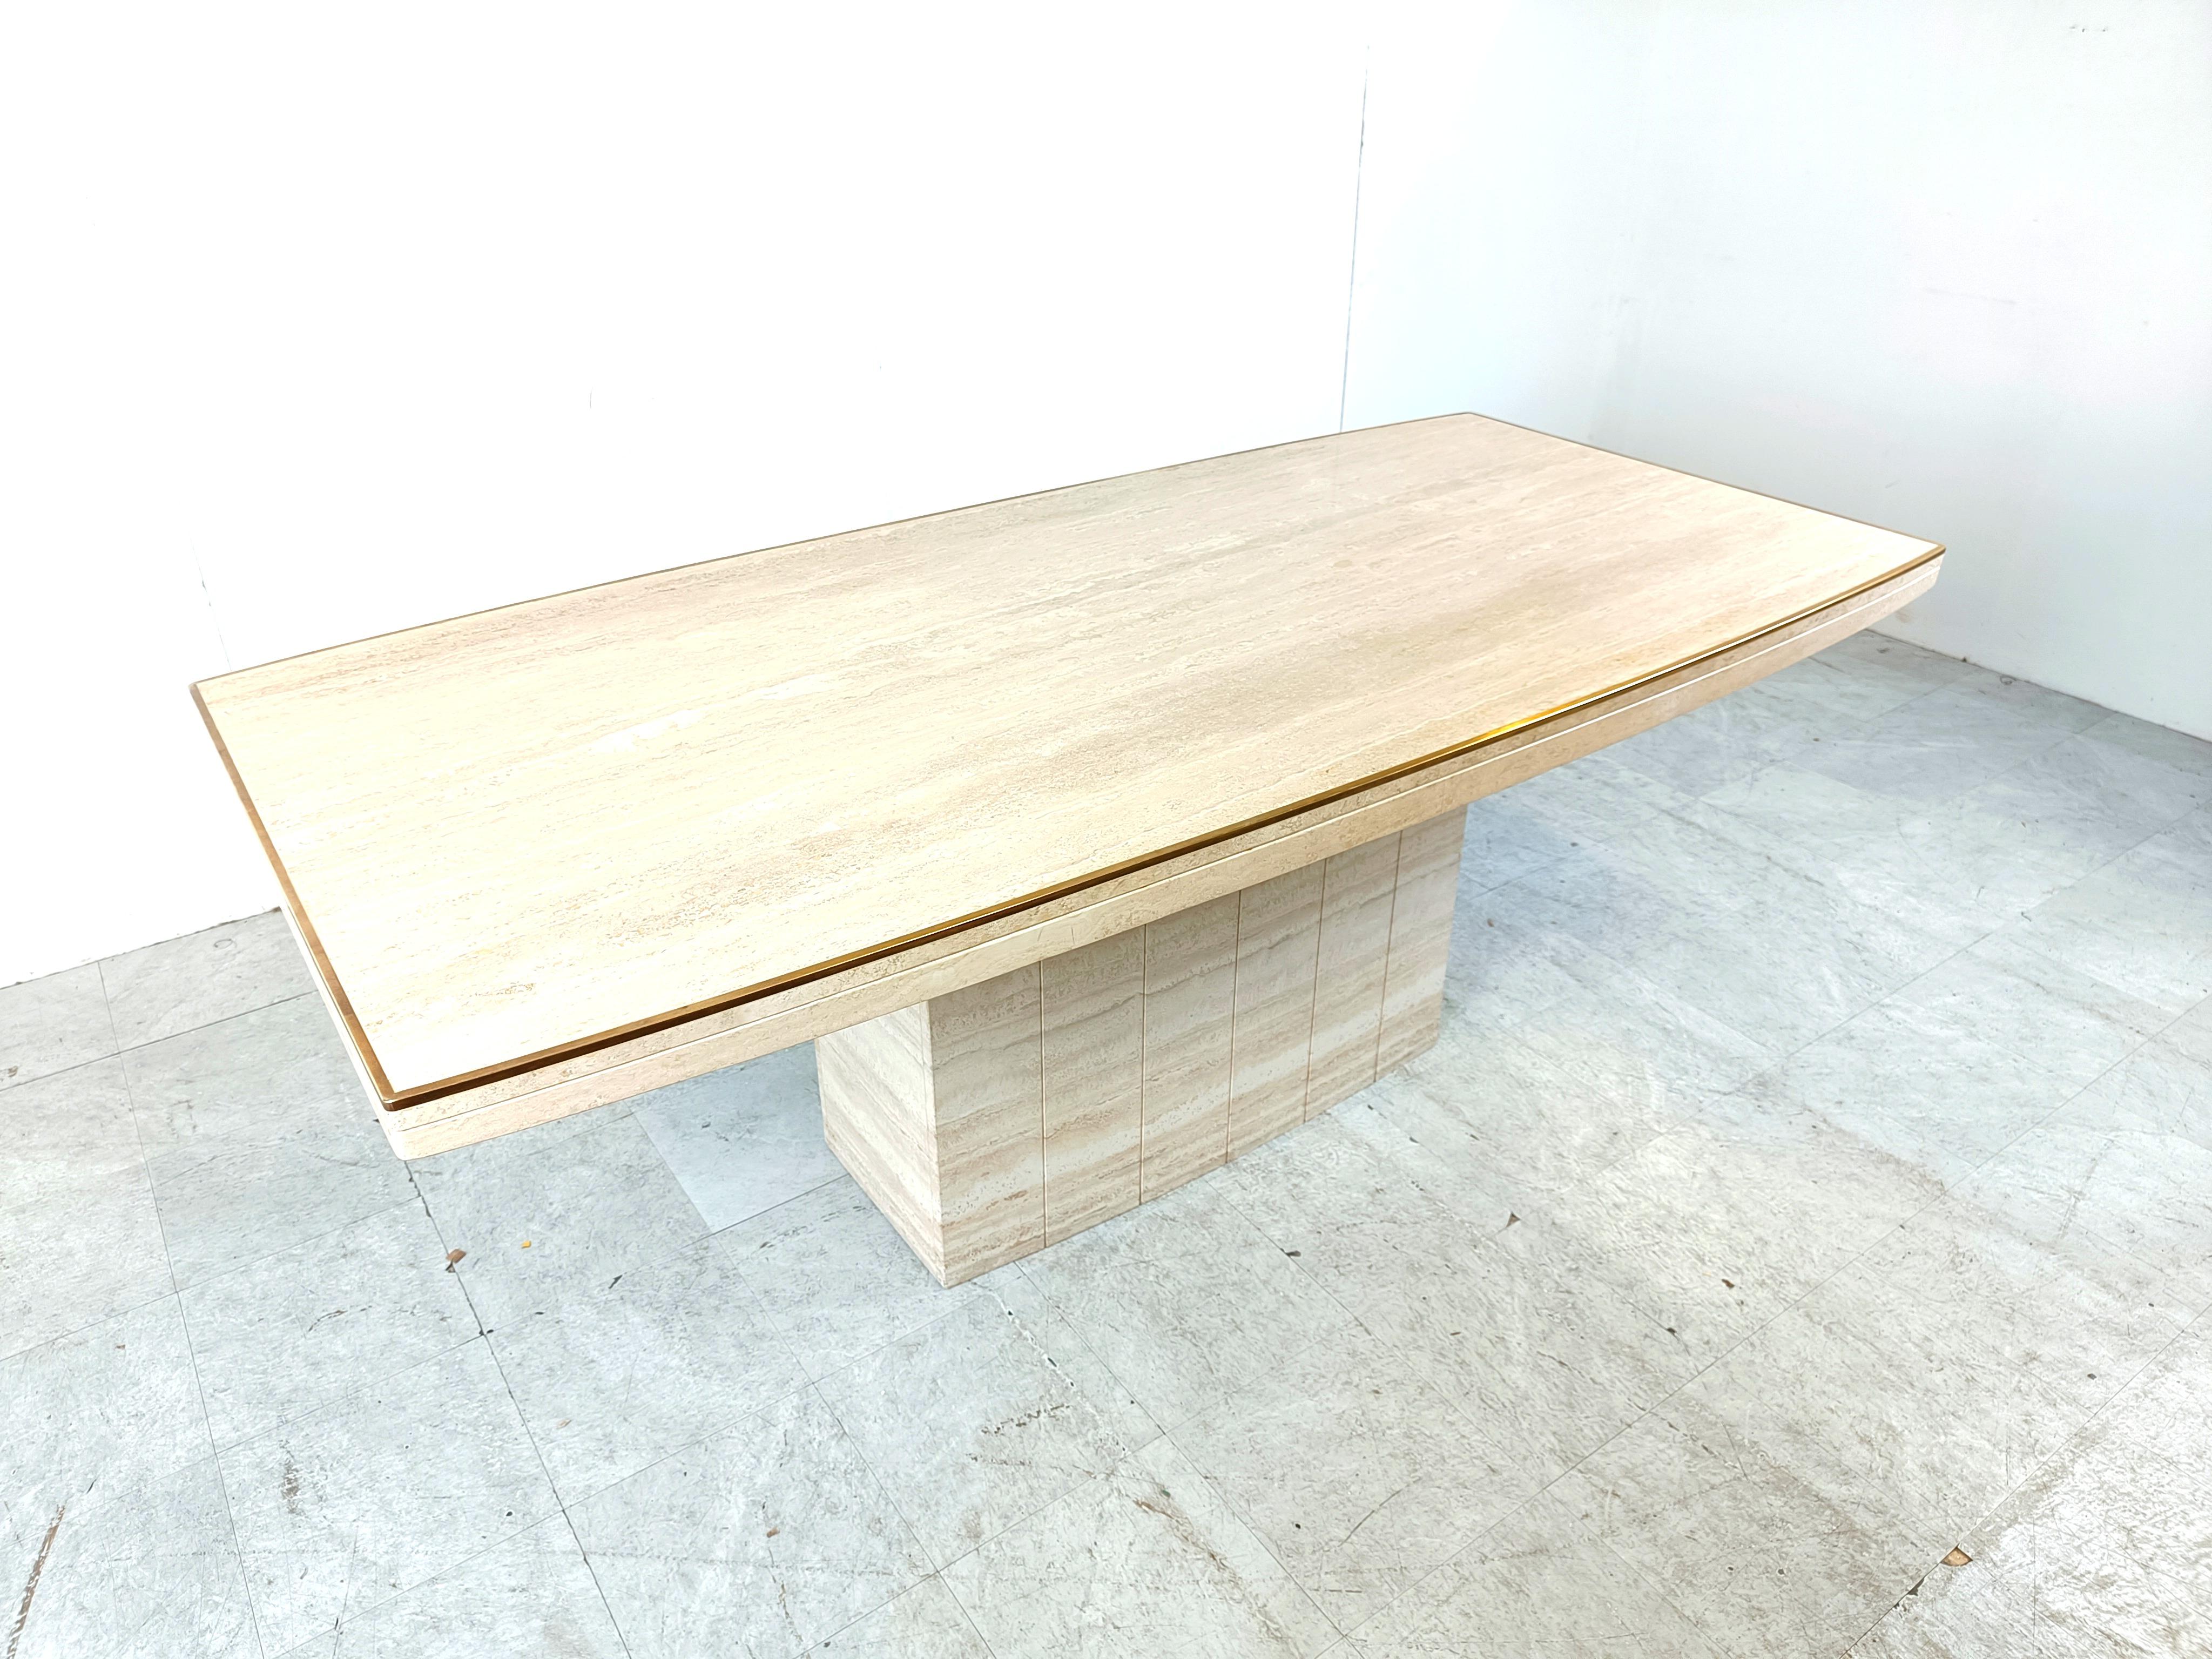 Large travertine and brass edge dining table in the manner of Willy Rizzo by Jean Charles.

Good eye catching dining table. 

Good condition.

1970s - Italy

Height: 78cm
Width: 210cm
Depth: 100cm

Ref: 203124